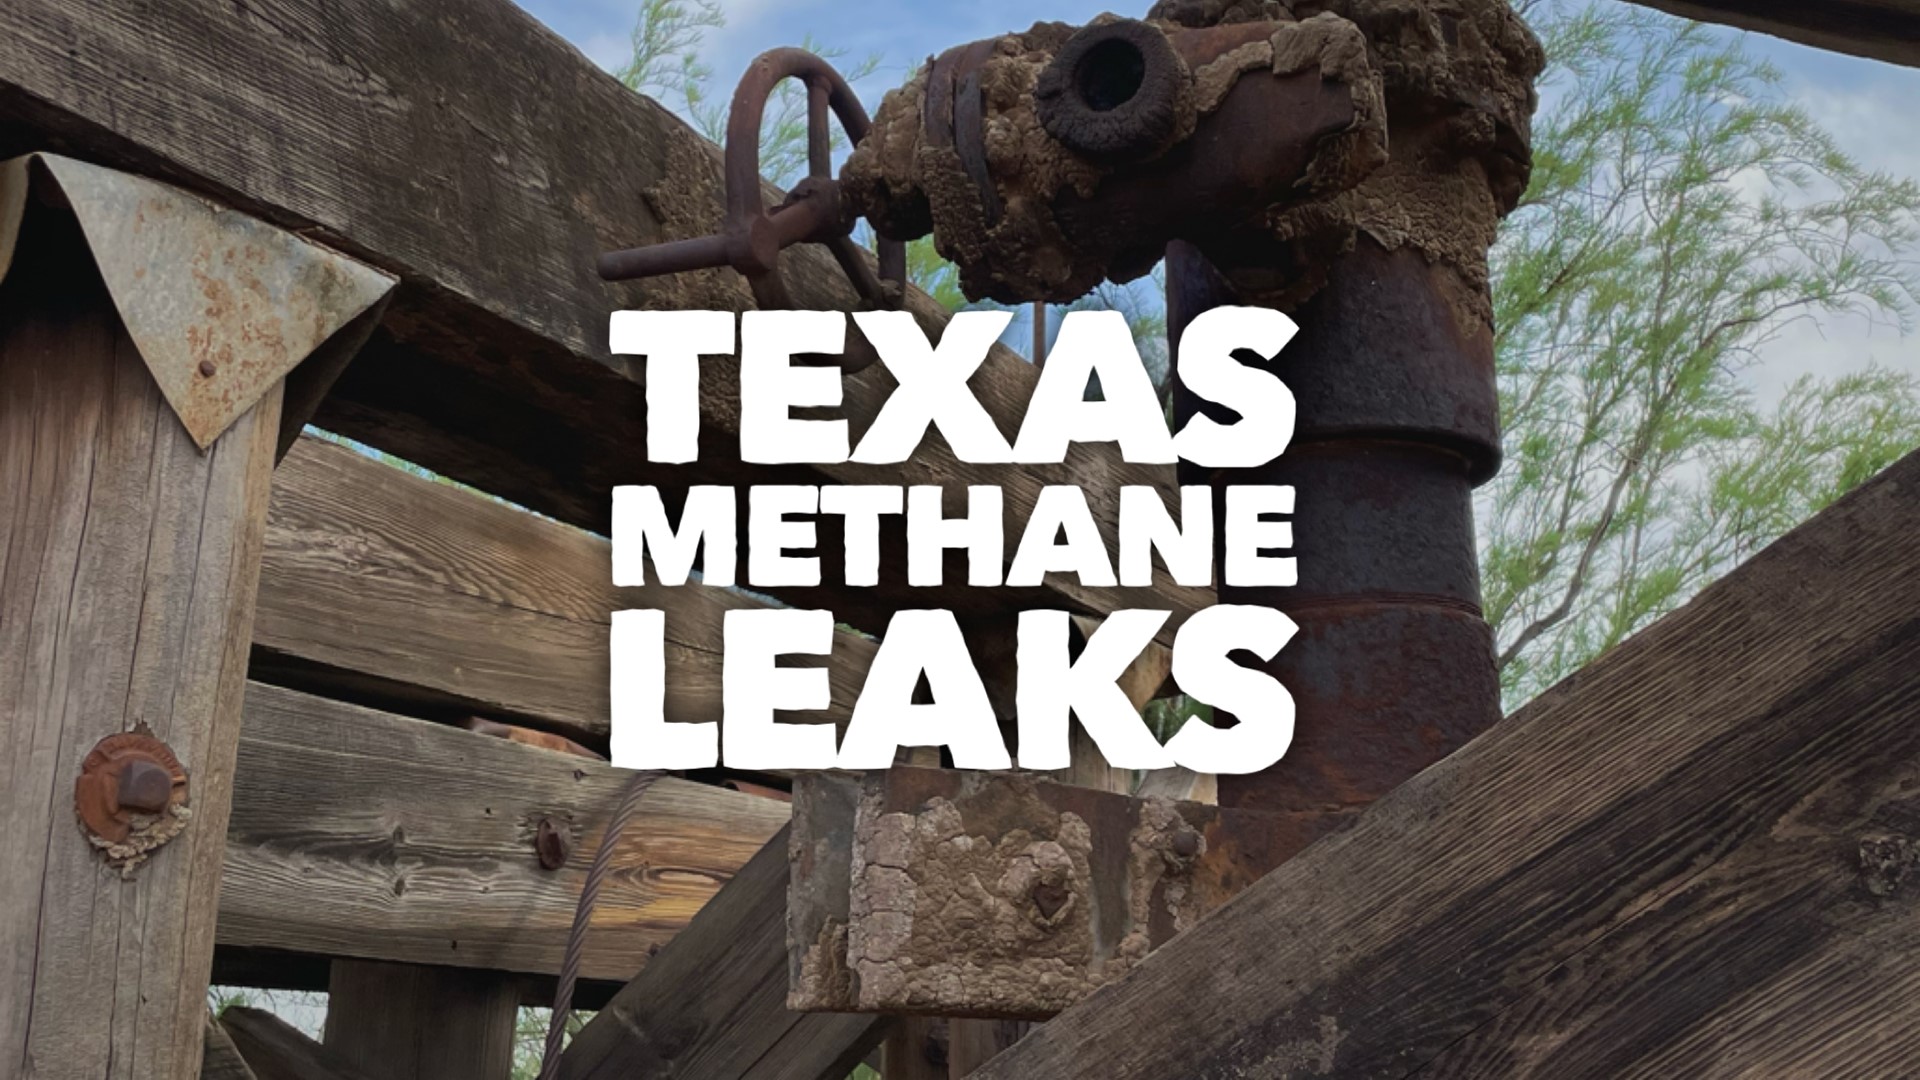 Over a 100-year period, the EPA says, methane's impact on climate change can be 25-times greater than carbon dioxide's.